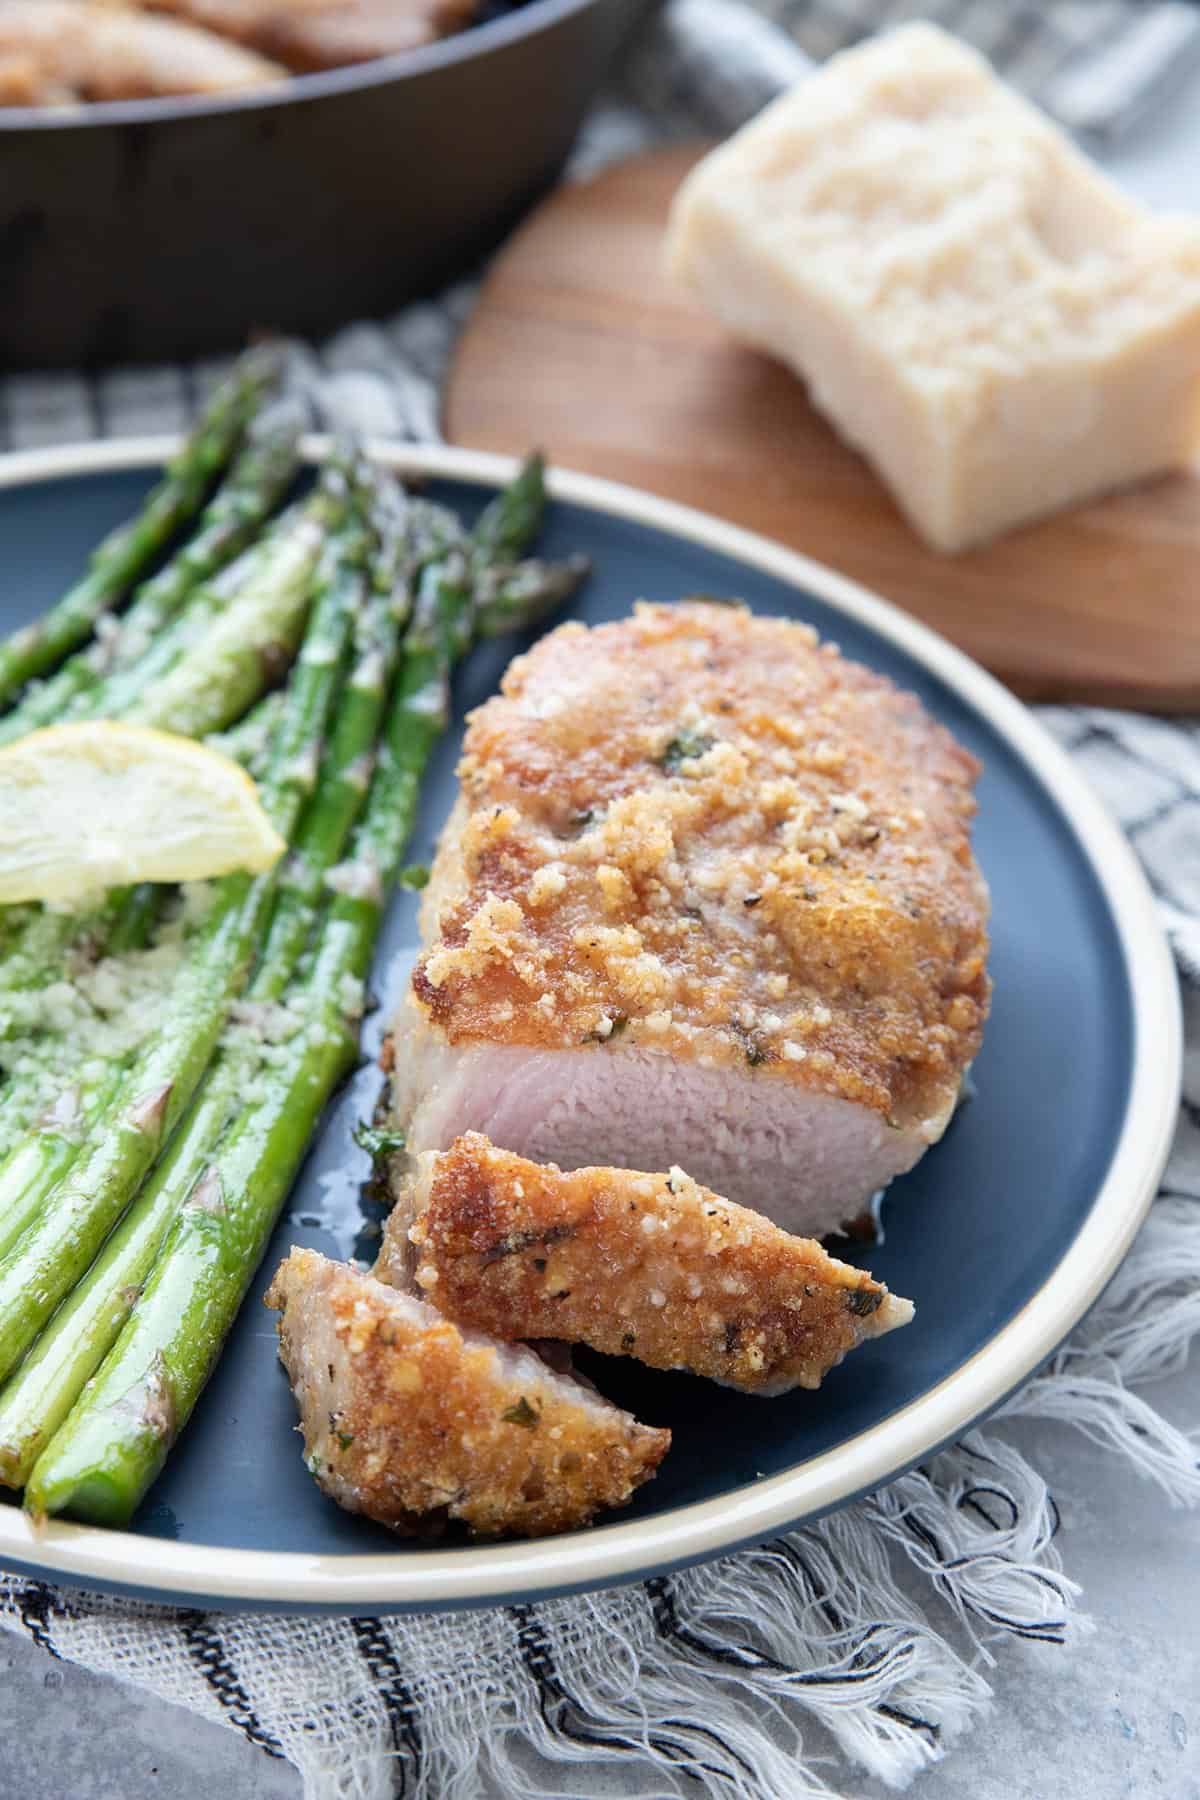 A parmesan crusted pork chop on a blue plate, with two pieces sliced off and some asparagus on the side.